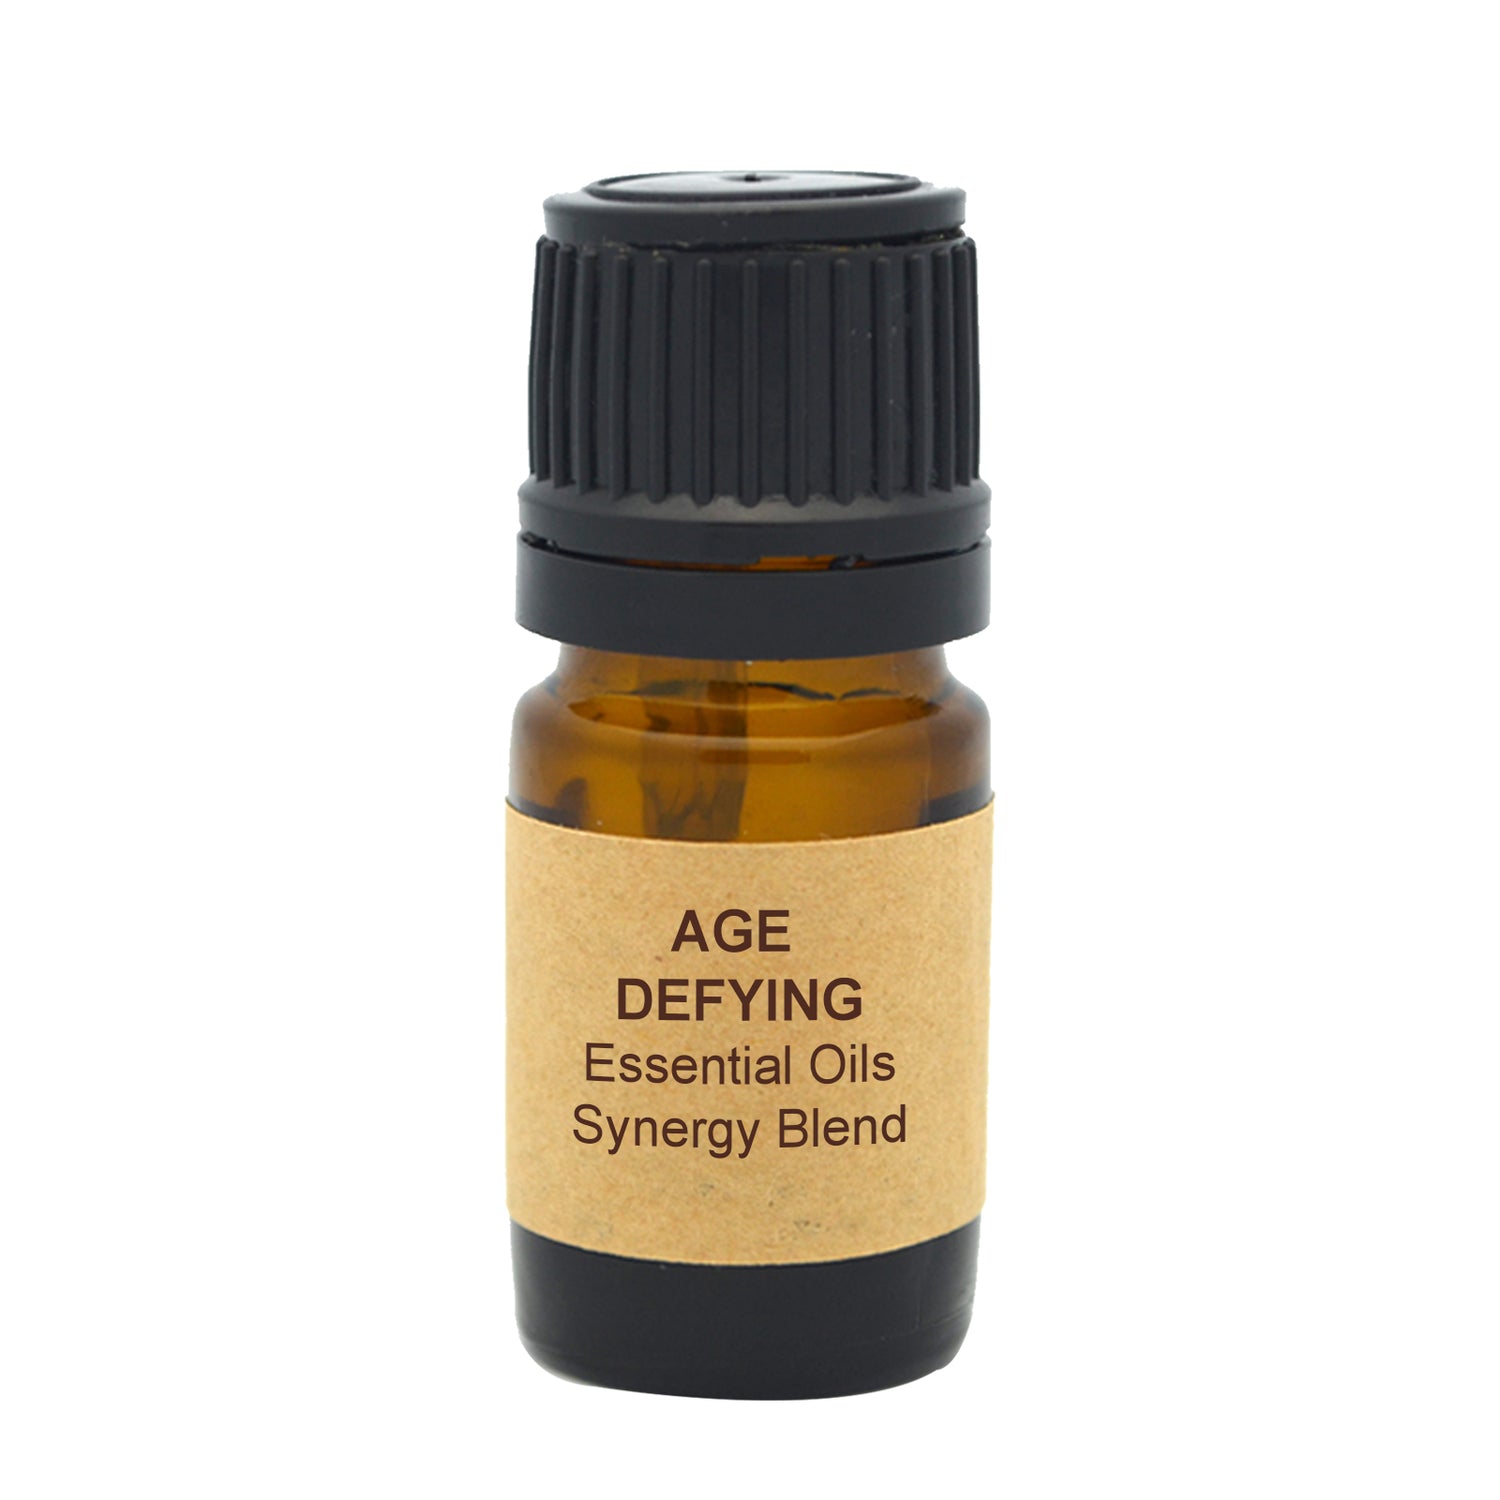 Age Defying Essential Oils Synergy Blend.